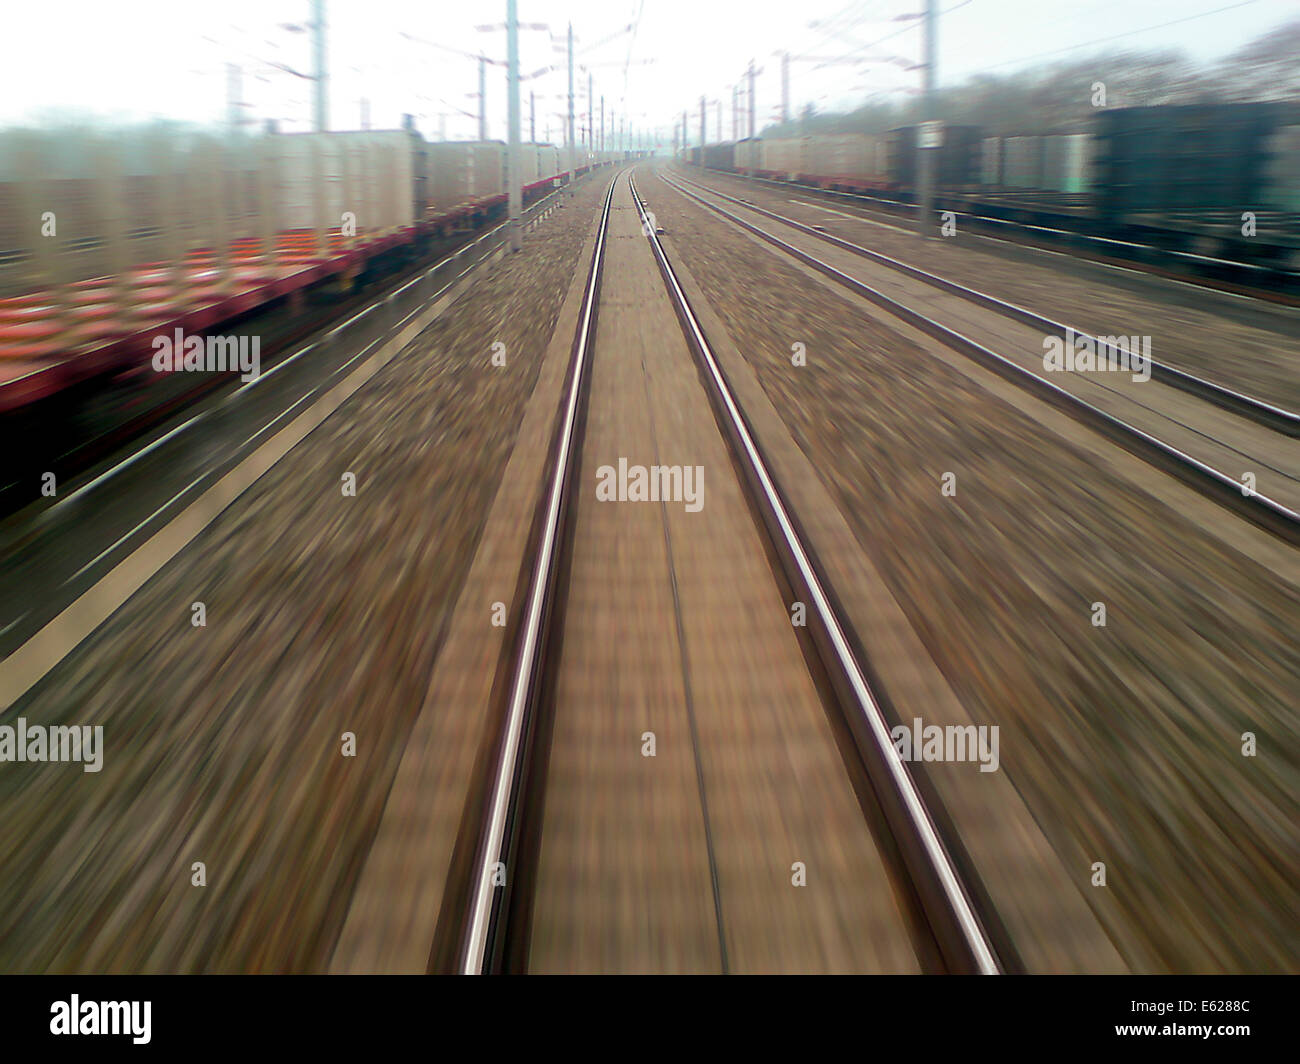 Railroad tracks from the perspective of the engine driver in the fast moving train. Stock Photo